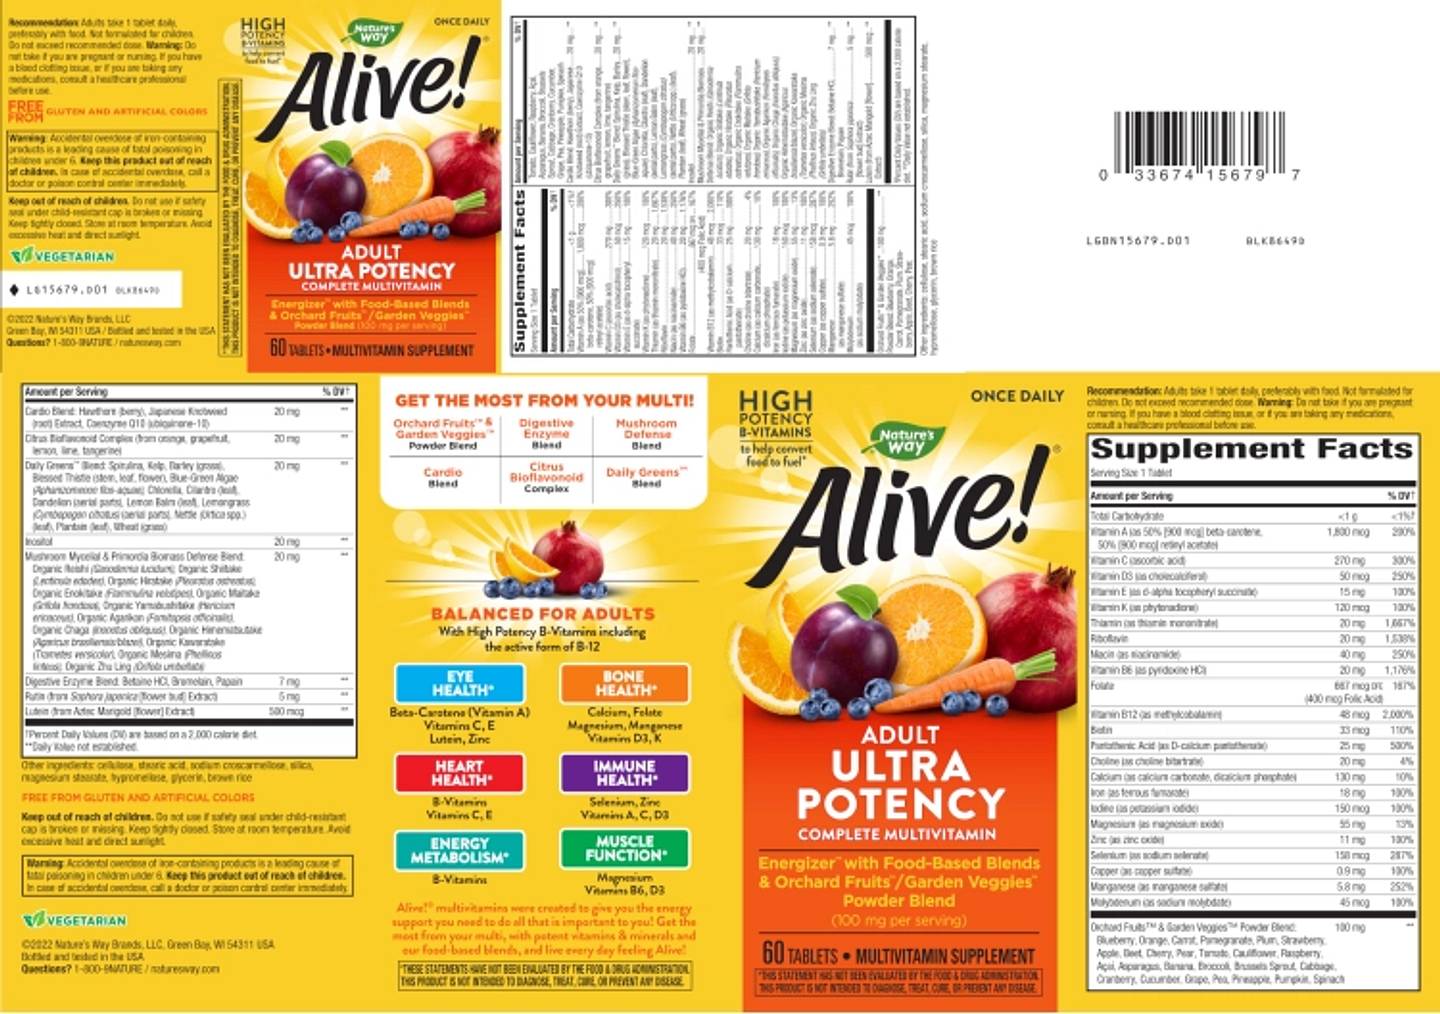 Nature's Way, Alive! Adult Ultra Potency Complete Multivitamin label